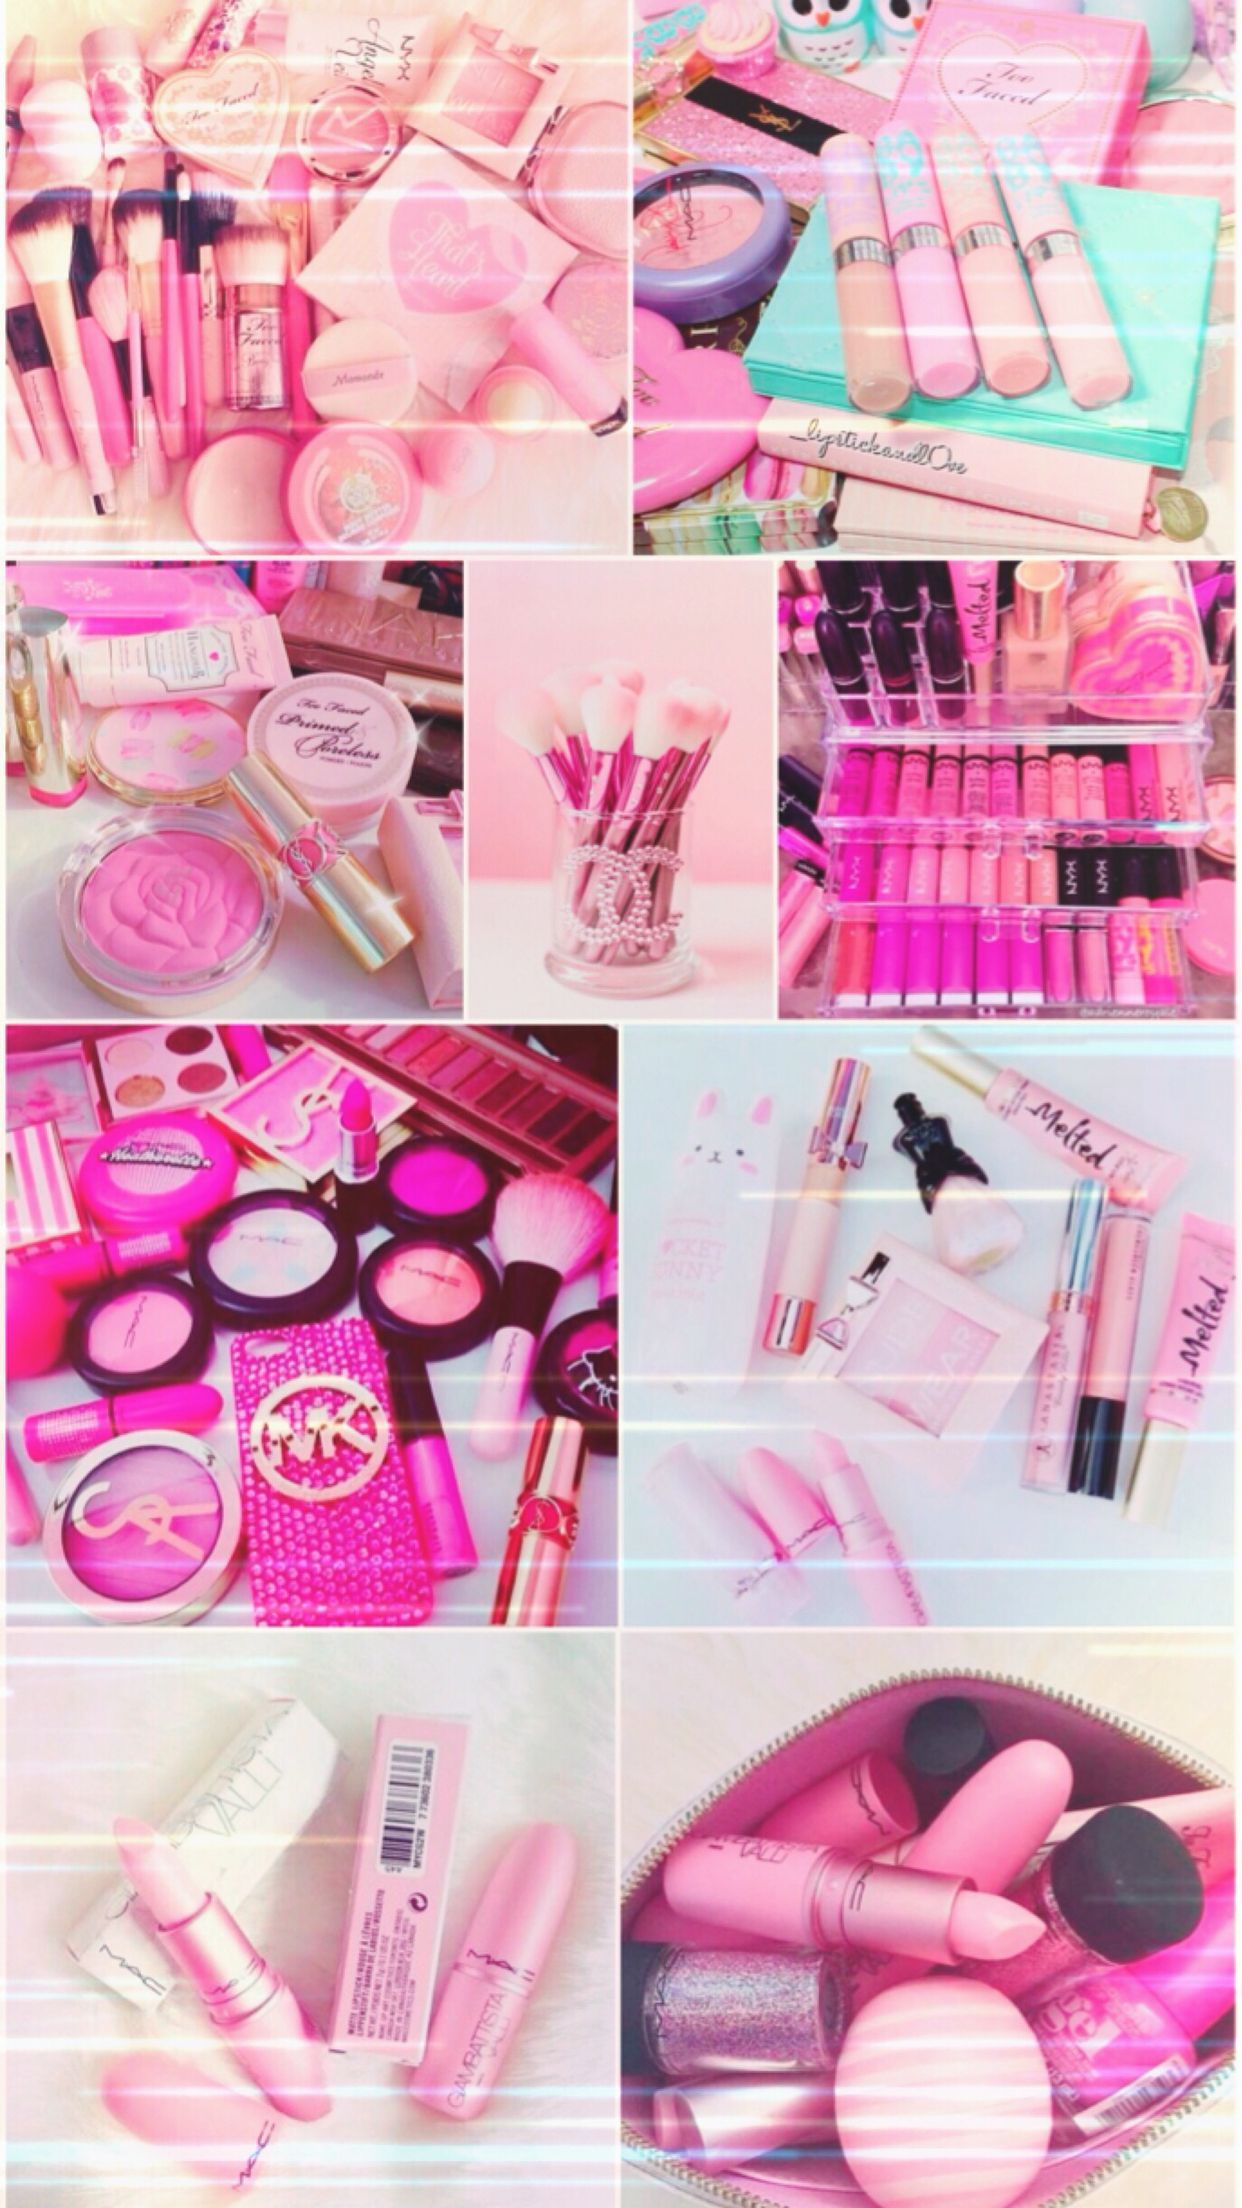 Aesthetic pink makeup background wallpaper for phone. - Makeup